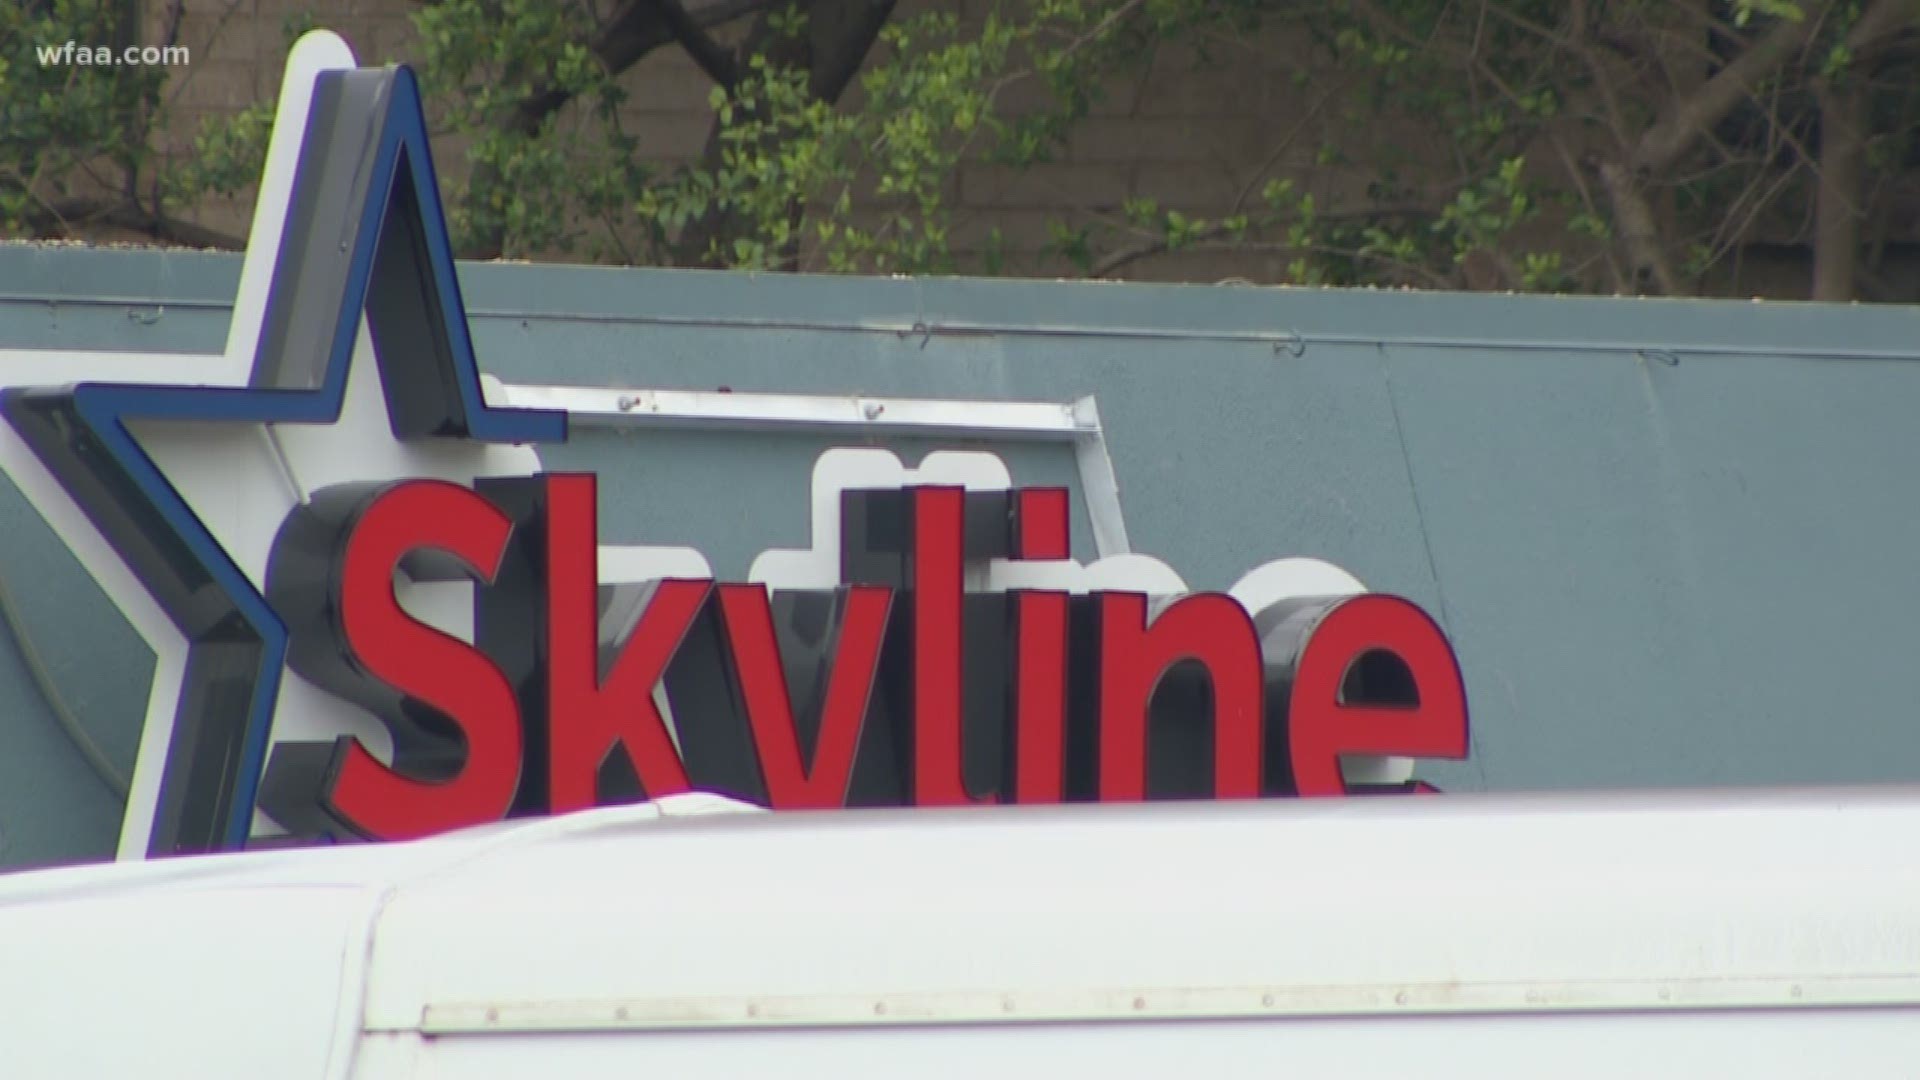 Skyline Nursing Center in Oak Cliff has the most positive cases of coronavirus with 30, followed by Brentwood Place One in East Dallas with 17.